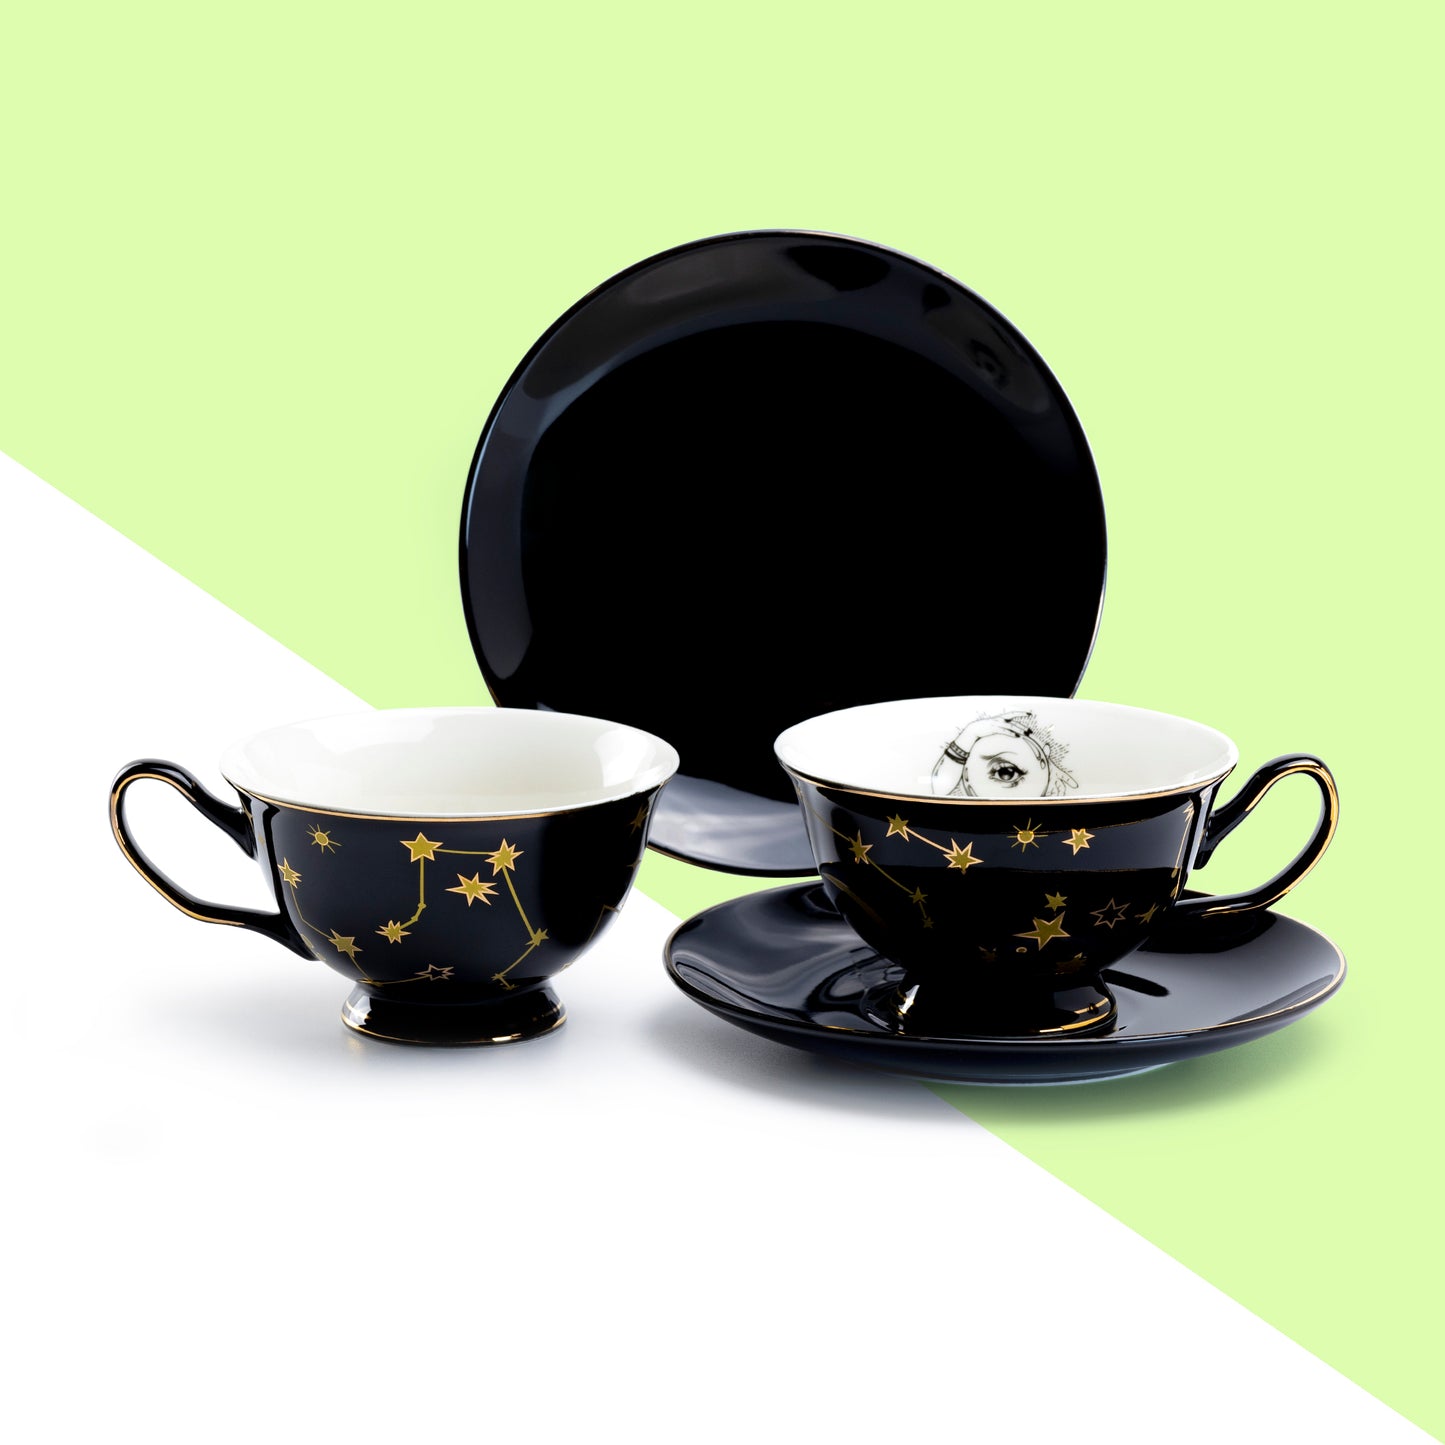 Witchy Crystal Ball Astrology Black Gold Fine Porcelain Tea Cup and Saucer Set